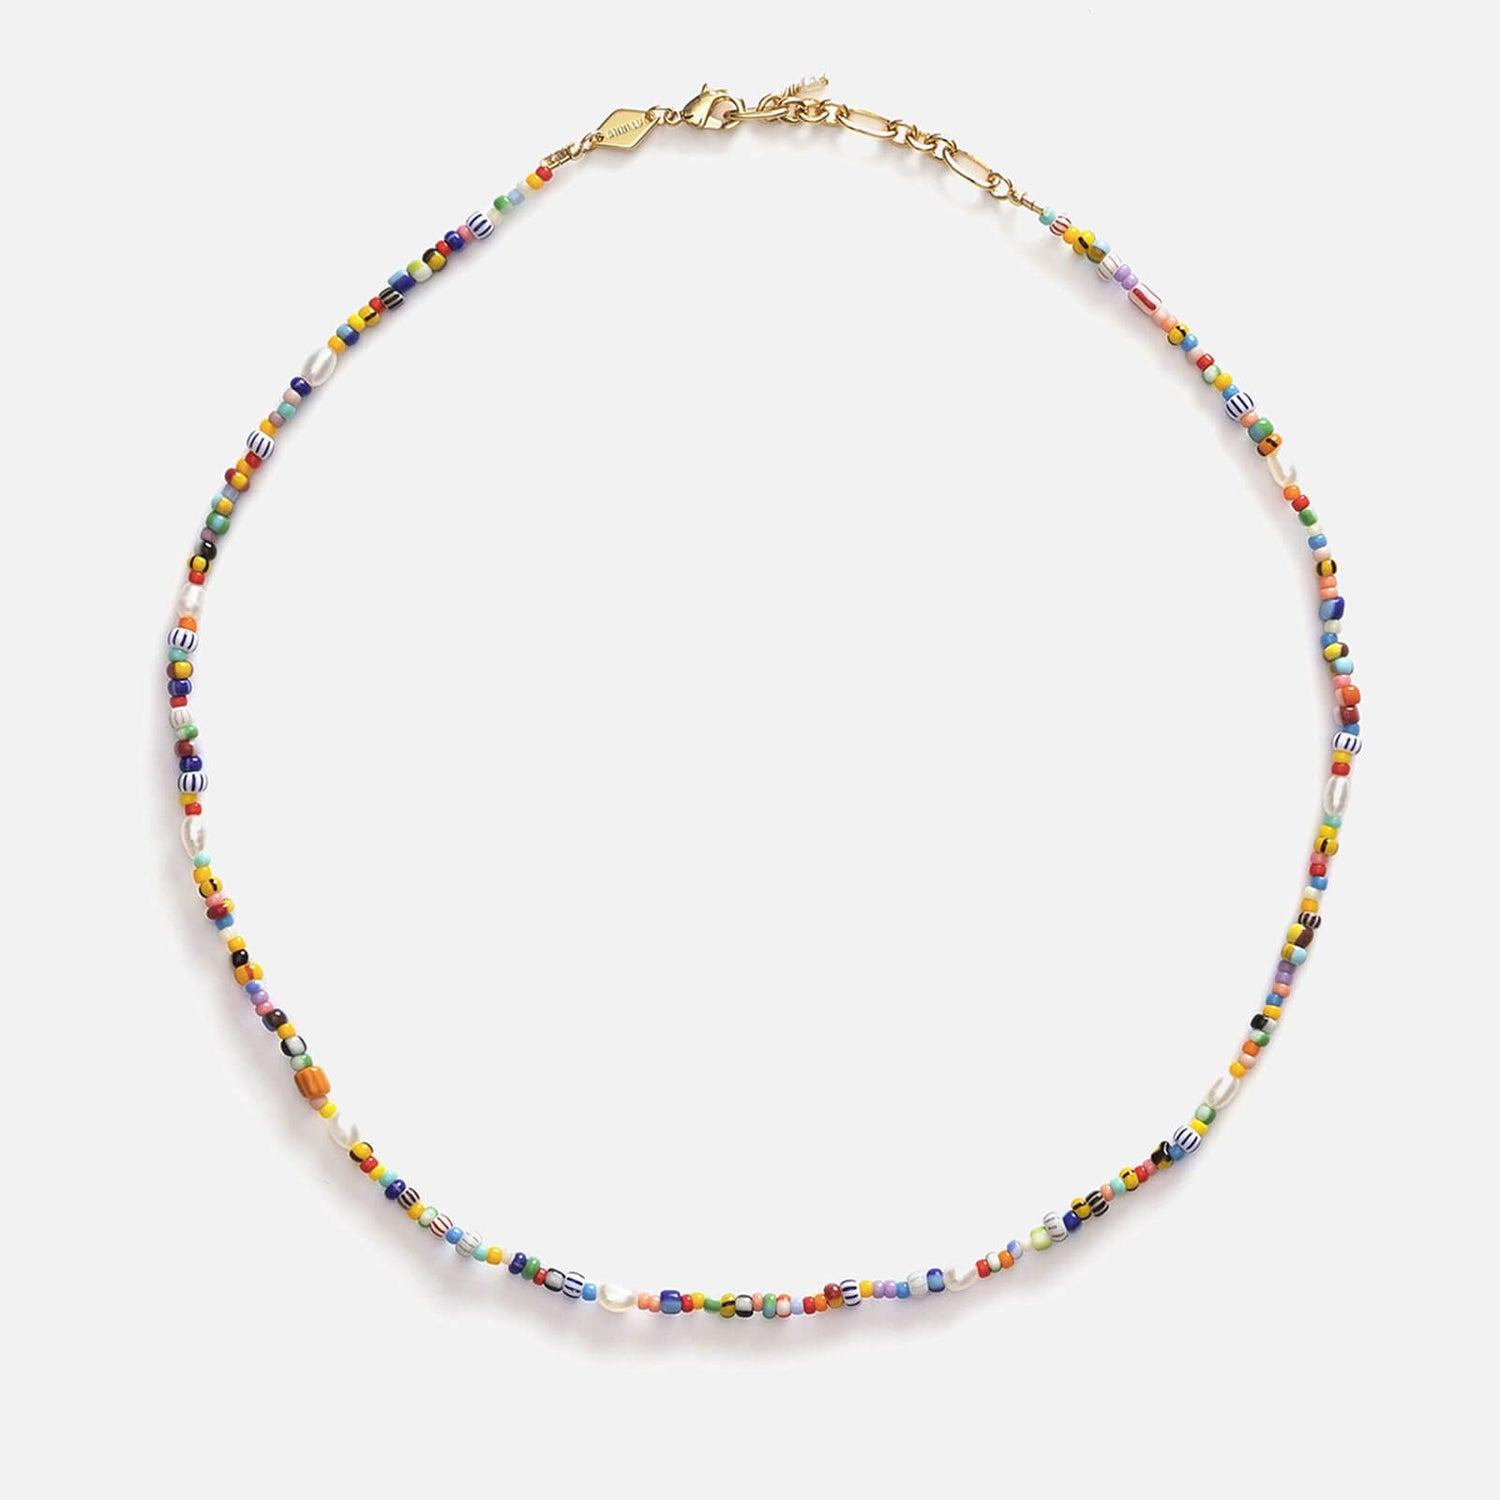 Anni Lu Women's Petit Alaia Necklace - Multi - Free UK Delivery Available